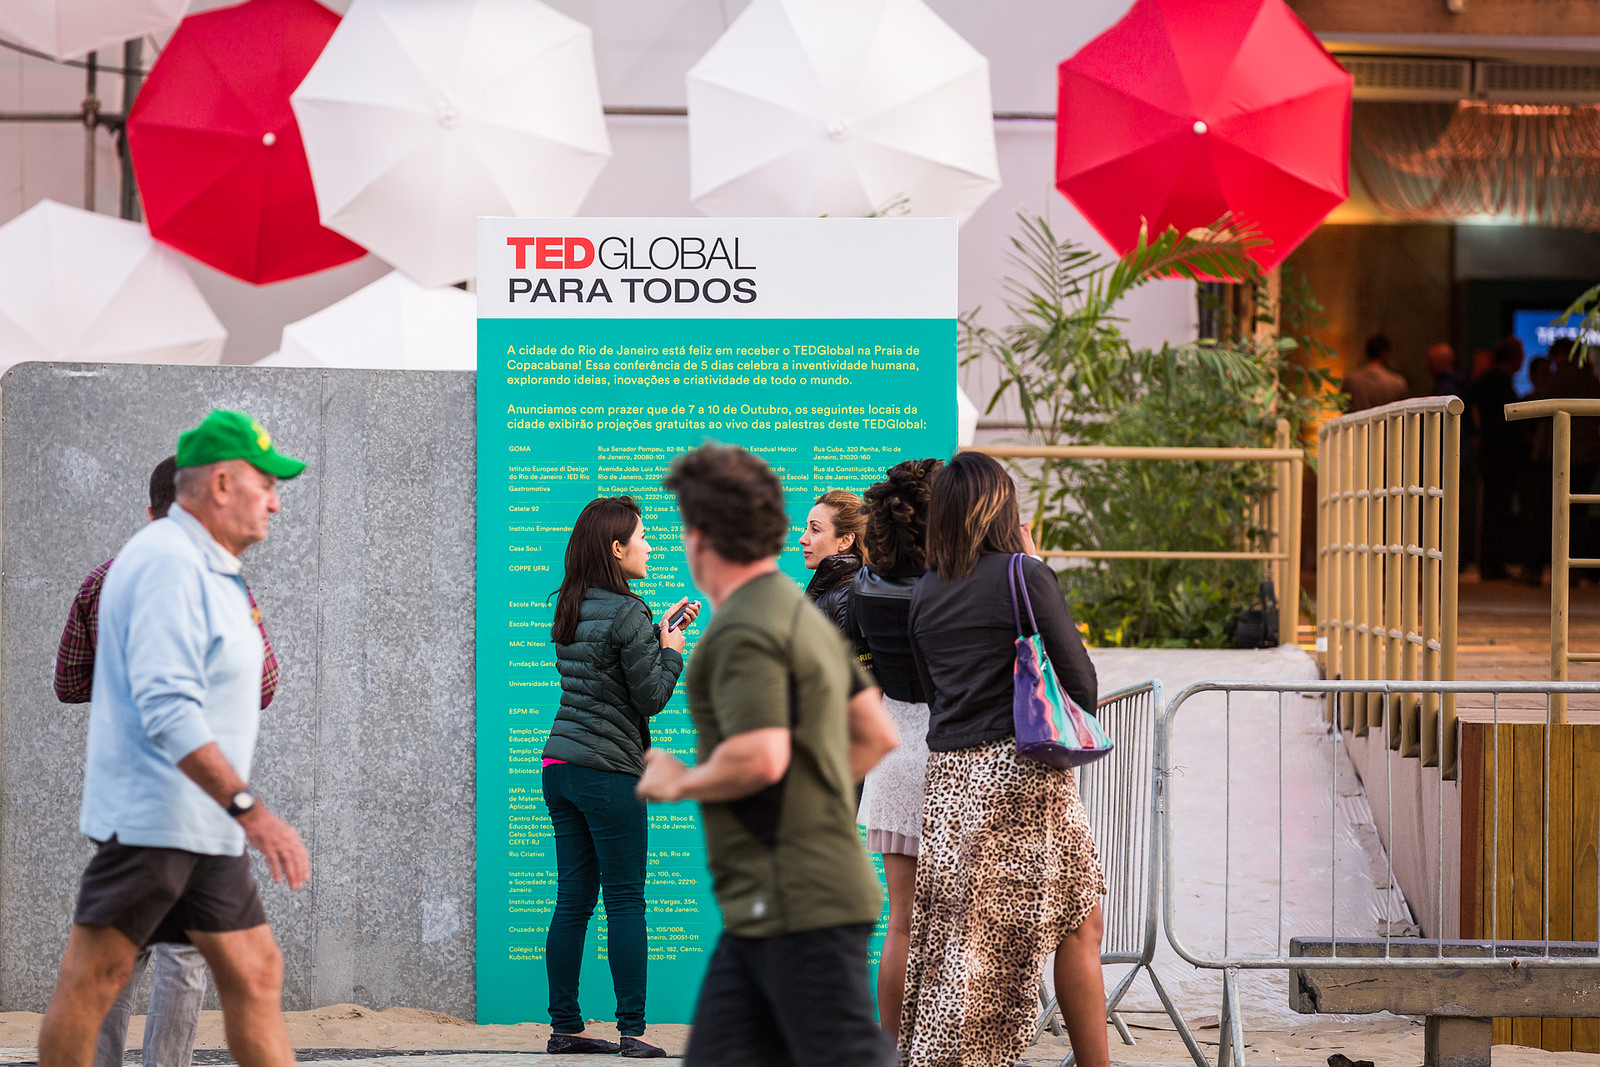 More than 40 education-focused organizations will be watching a livestream of the conference around the city of Rio de Janeiro. Read more about TED Para Todos. Photo: Ryan Lash